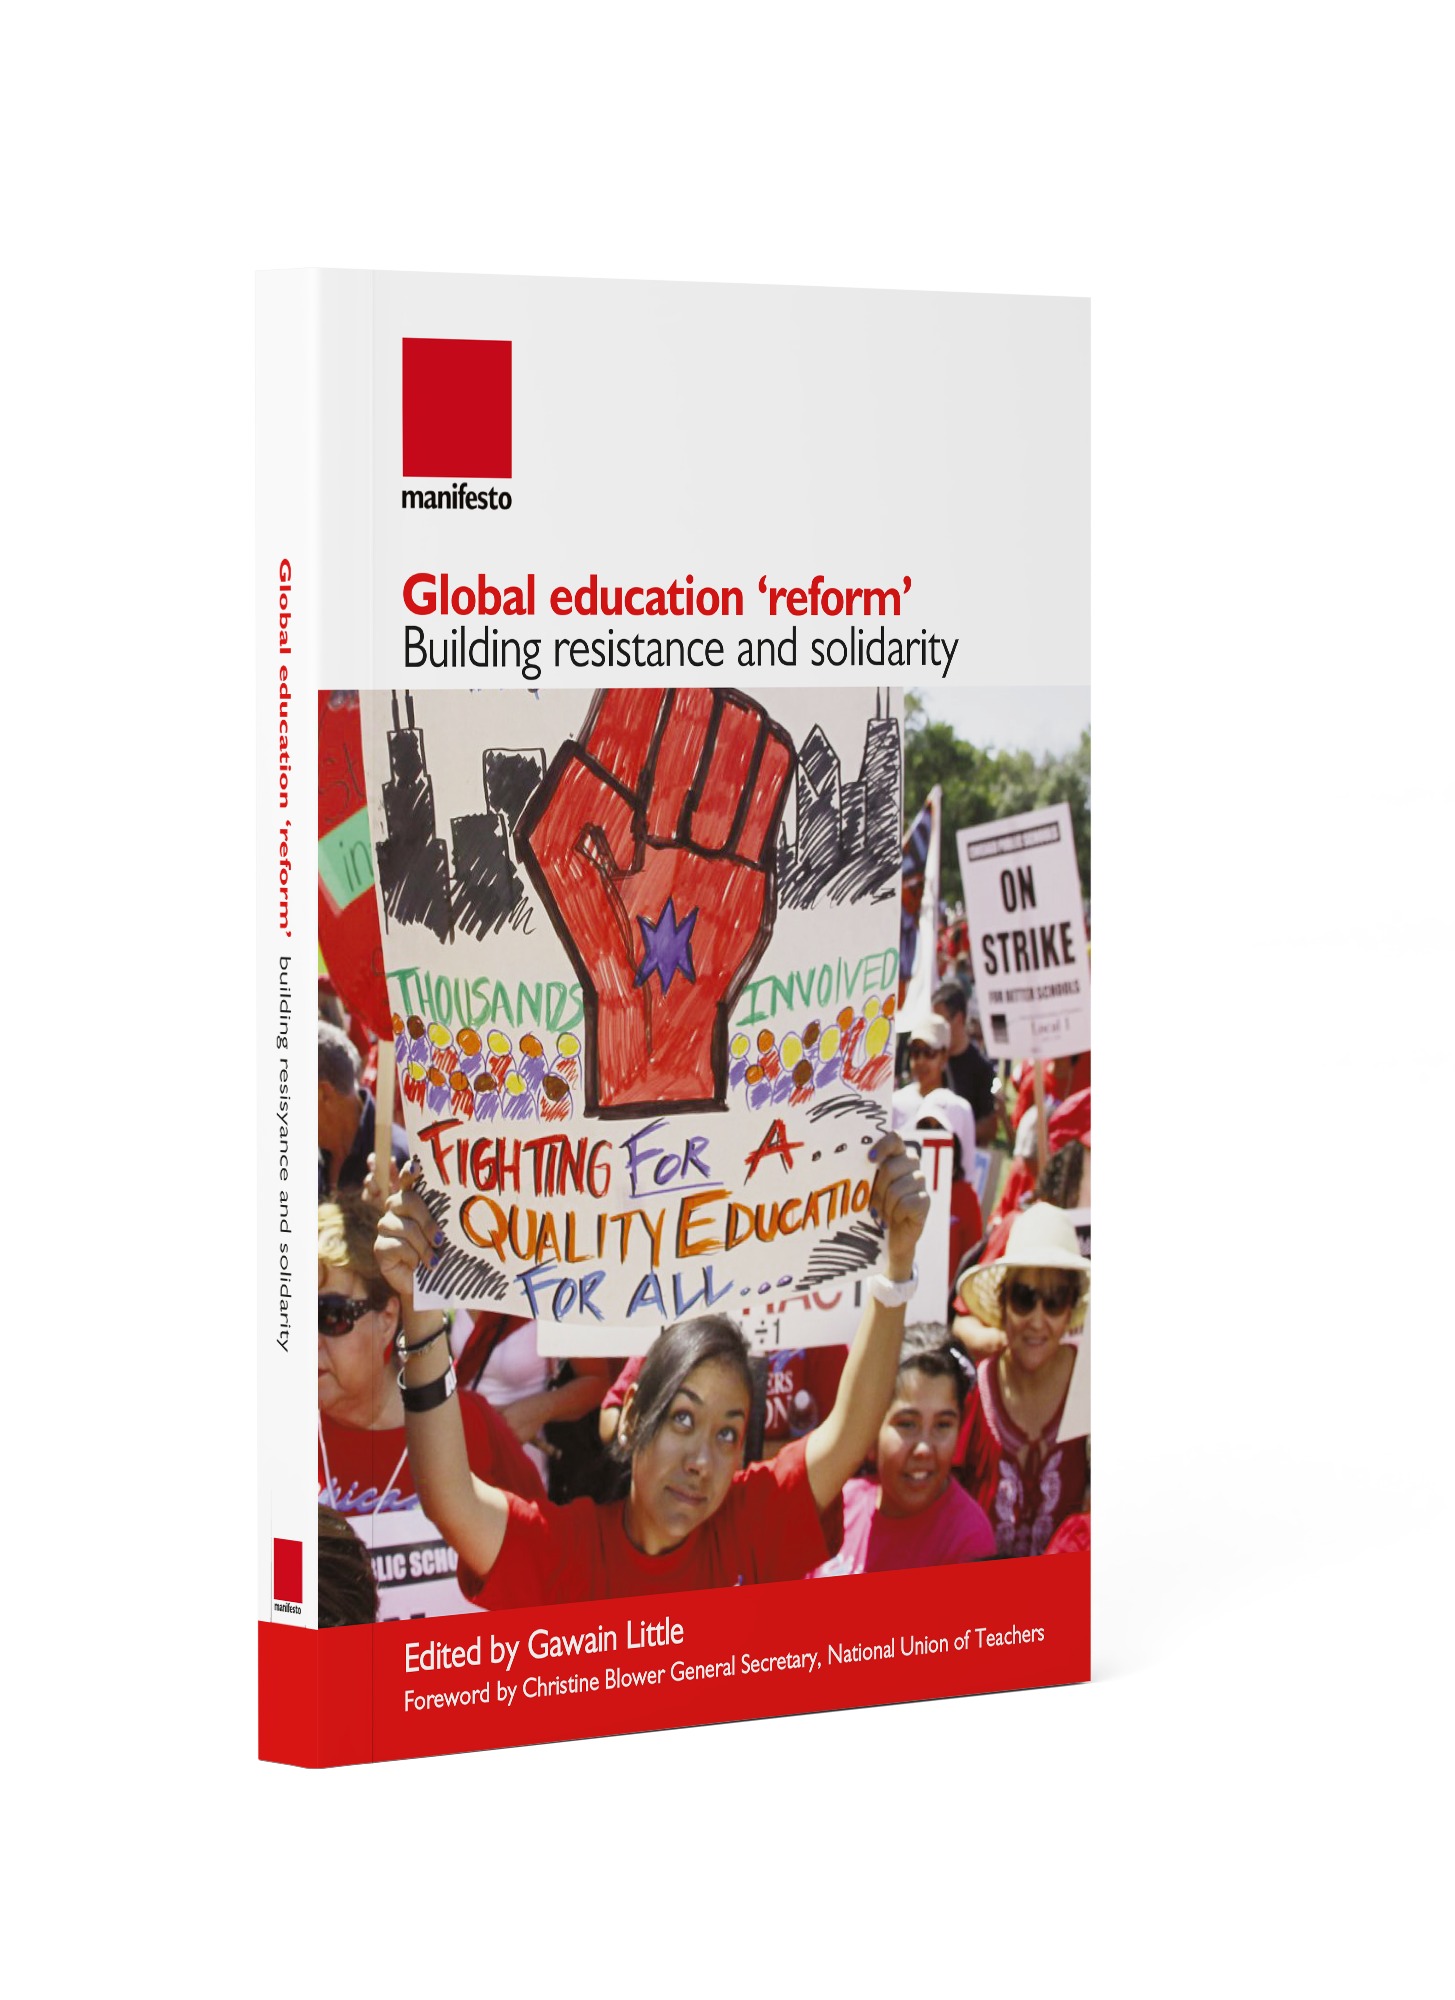 Global education ‘reform’: Building resistance and solidarity